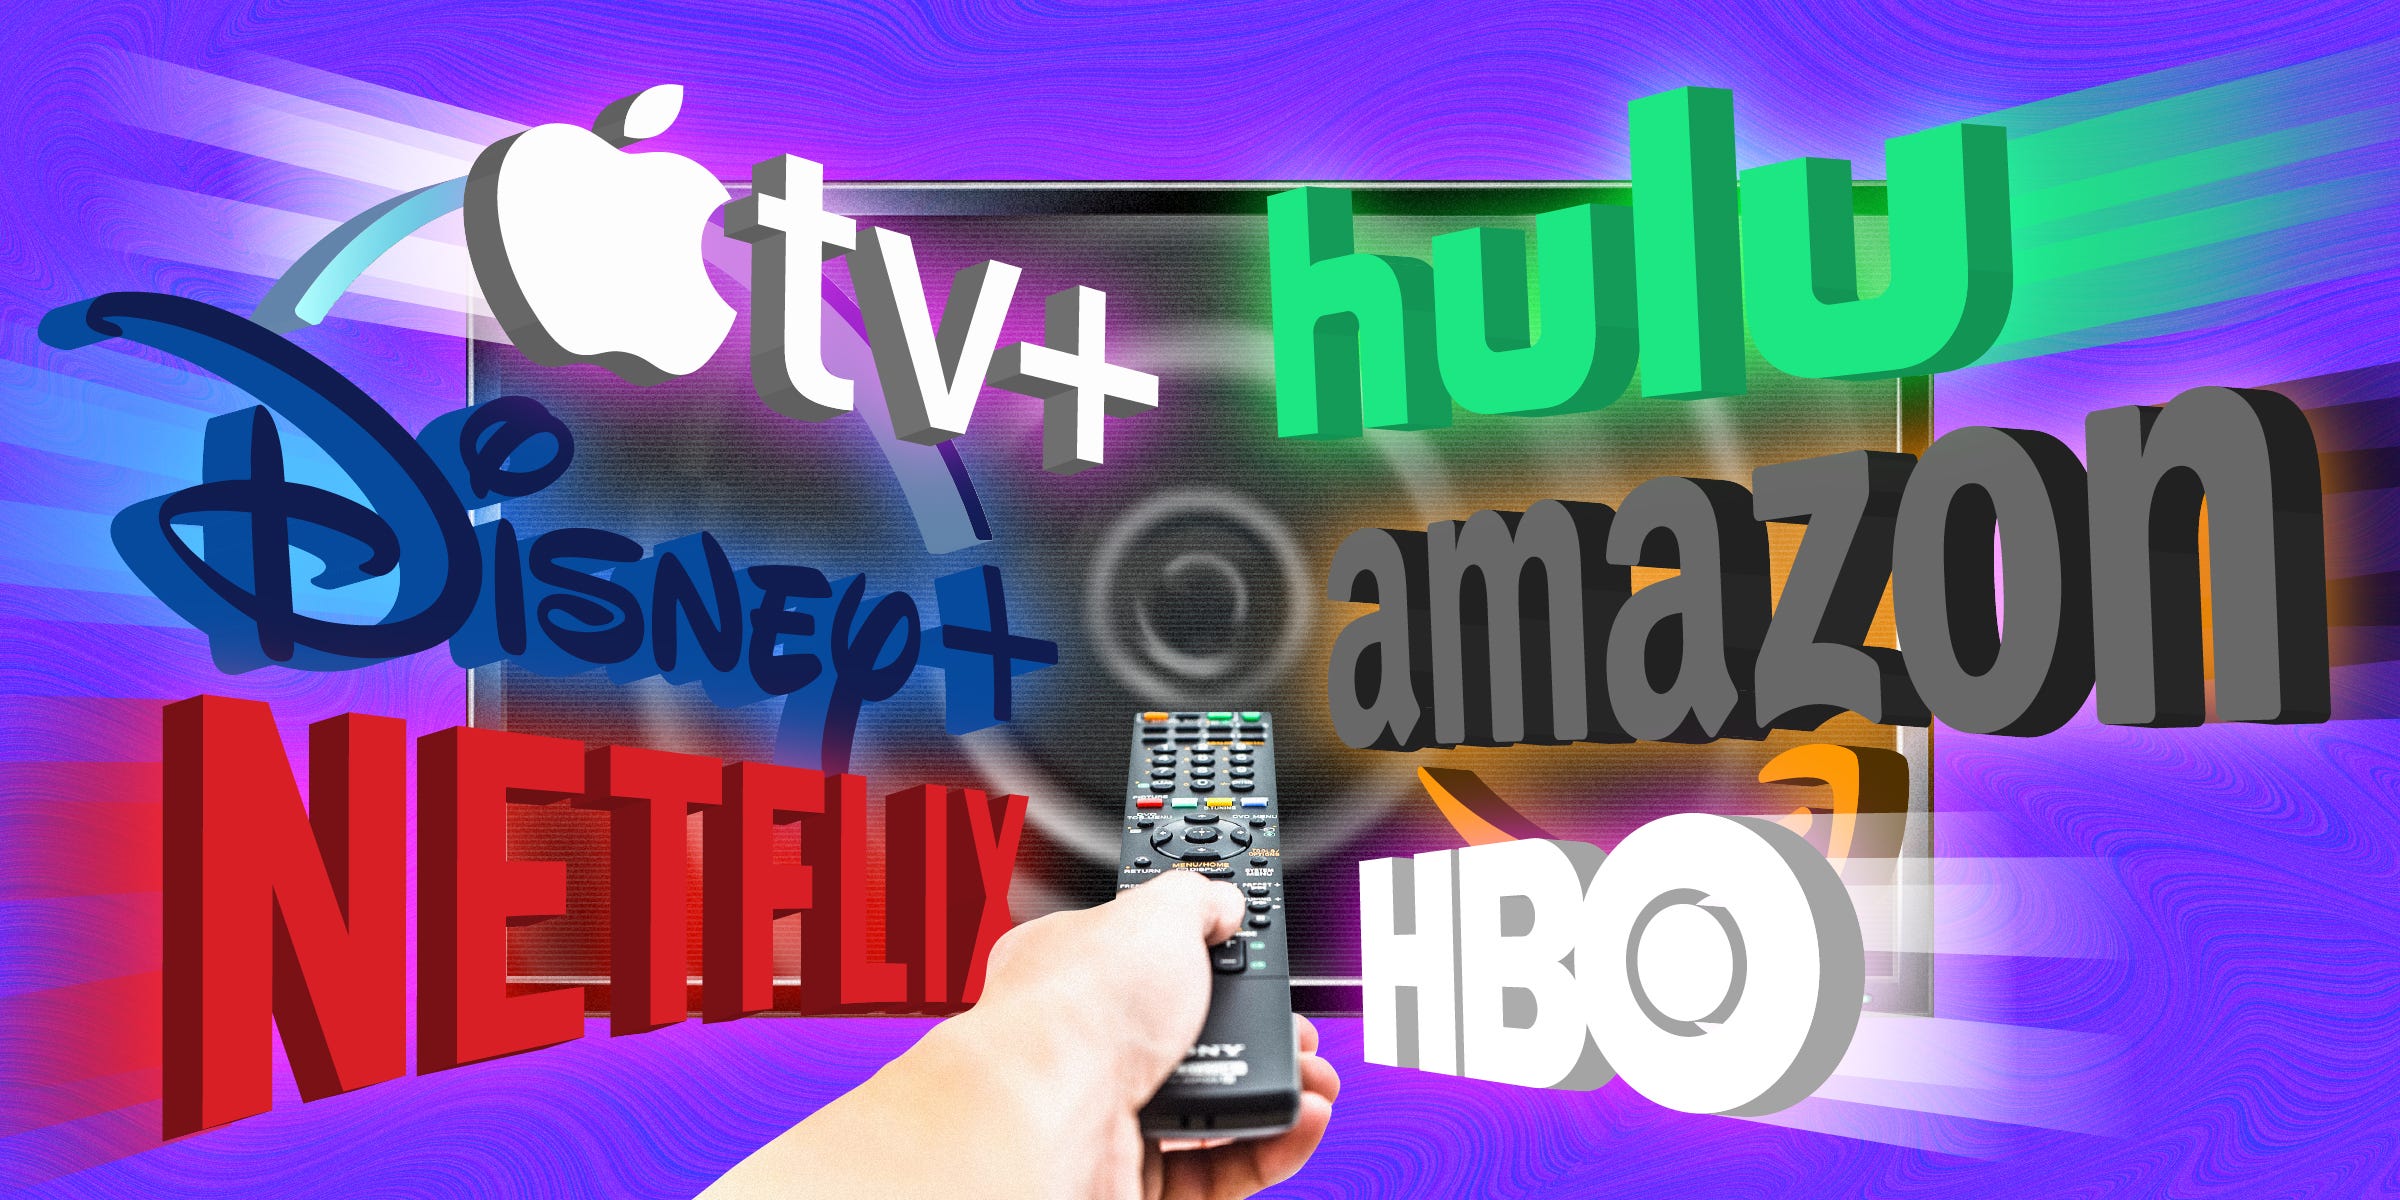 Apple TV+, Disney+, Netflix, Hulu, Amazon, and HBO logos flying towards the center of a TV. A hand holding a remote is directed towards the center. The background is purple with a warped texture on top of it.